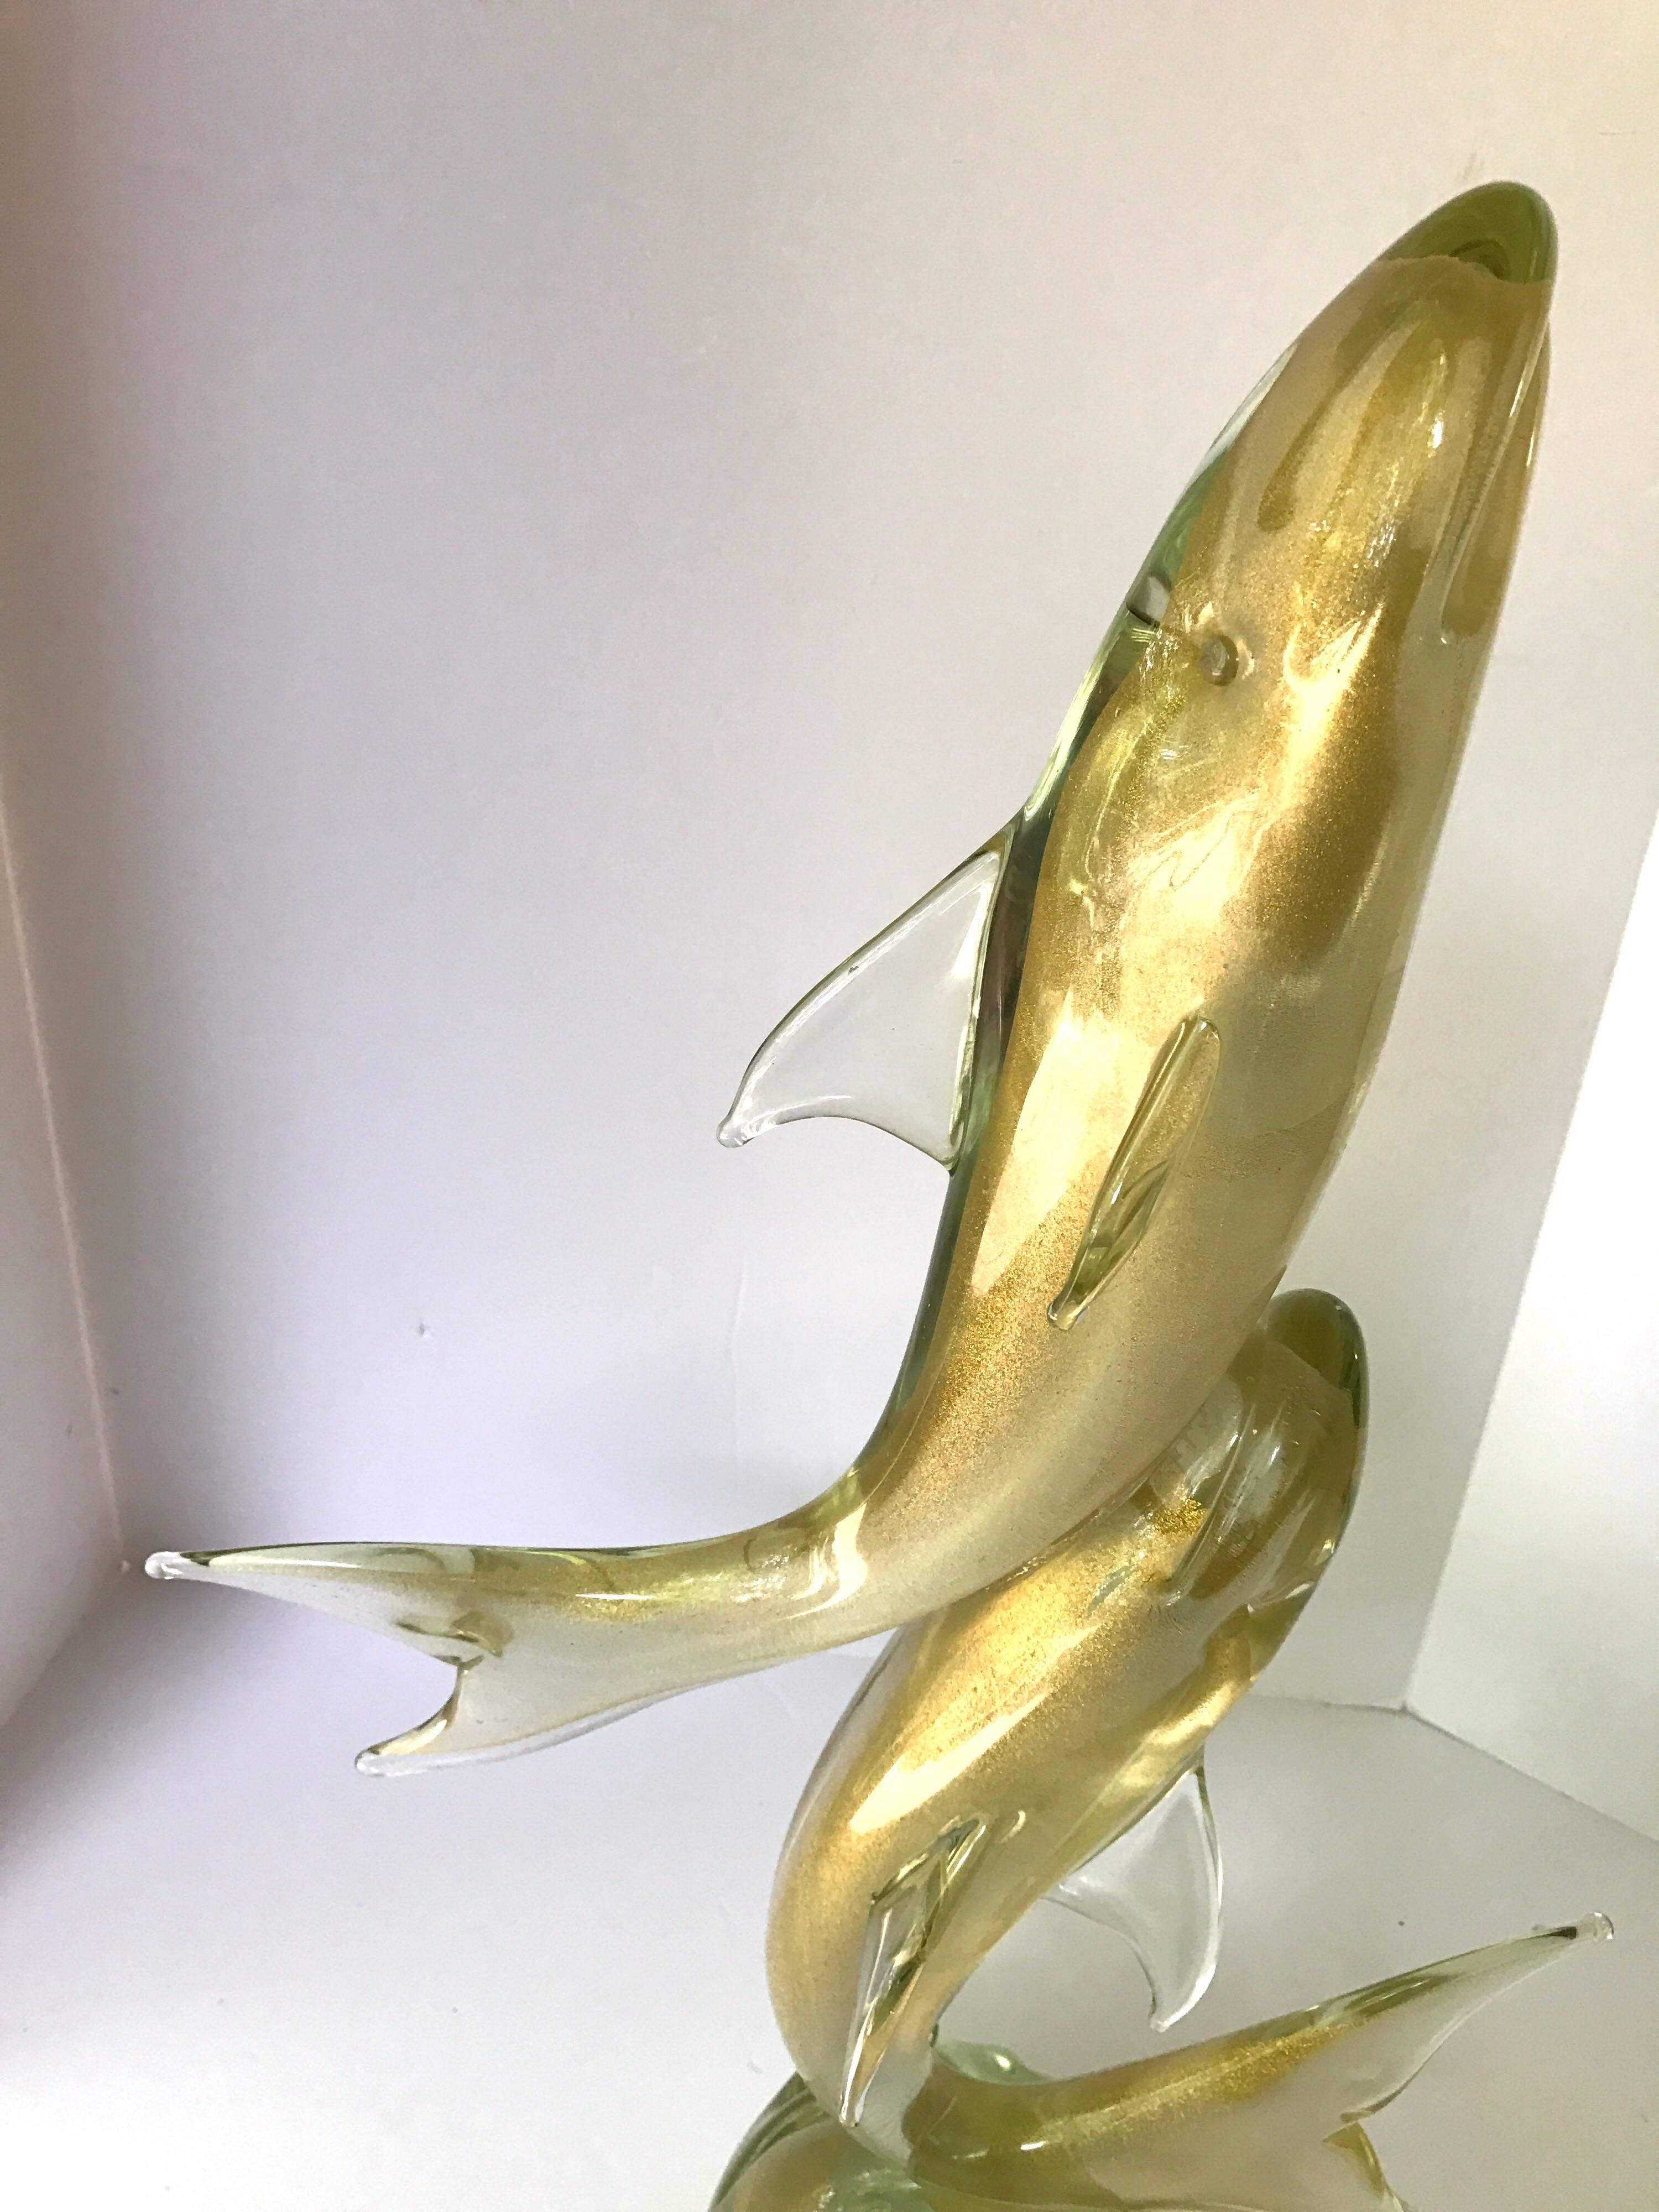 Standing twenty six inches tall, this golden Murano glass sculpture is guaranteed to set your home apart.
It is signed on the bottom and is in mint condition with a weight of close to forty pounds.